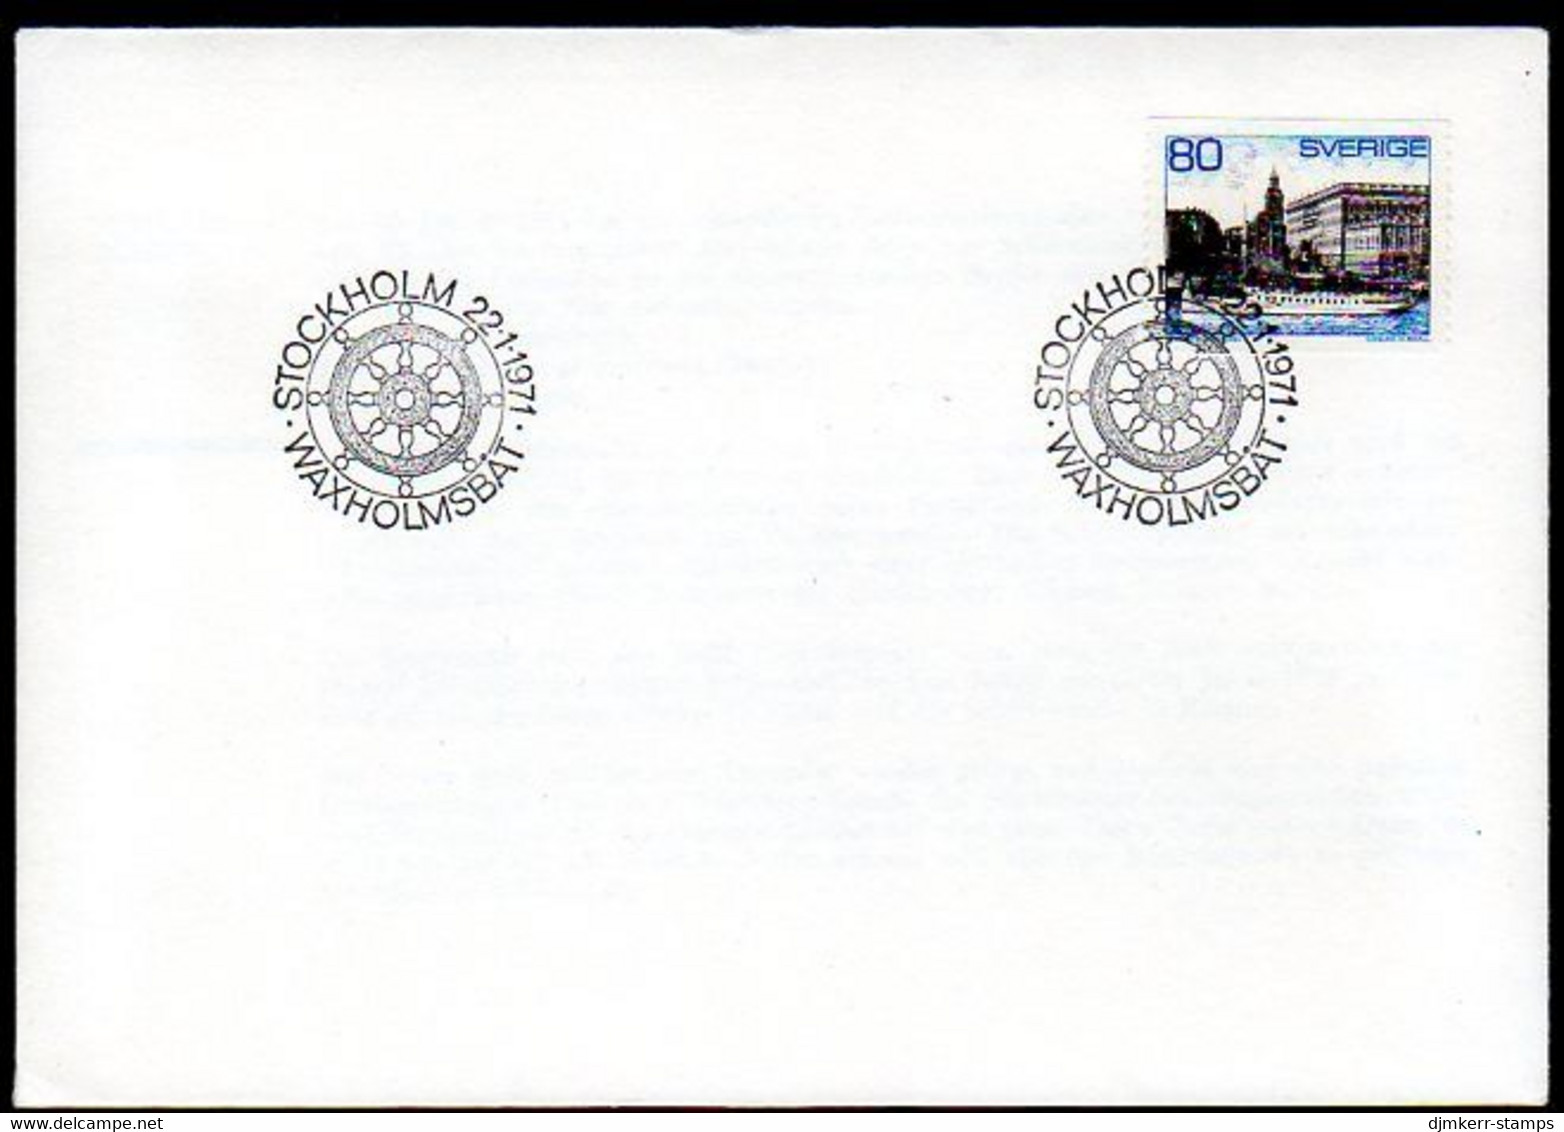 SWEDEN 1971 Royal Castle And Ship FDC  Michel 700y - FDC